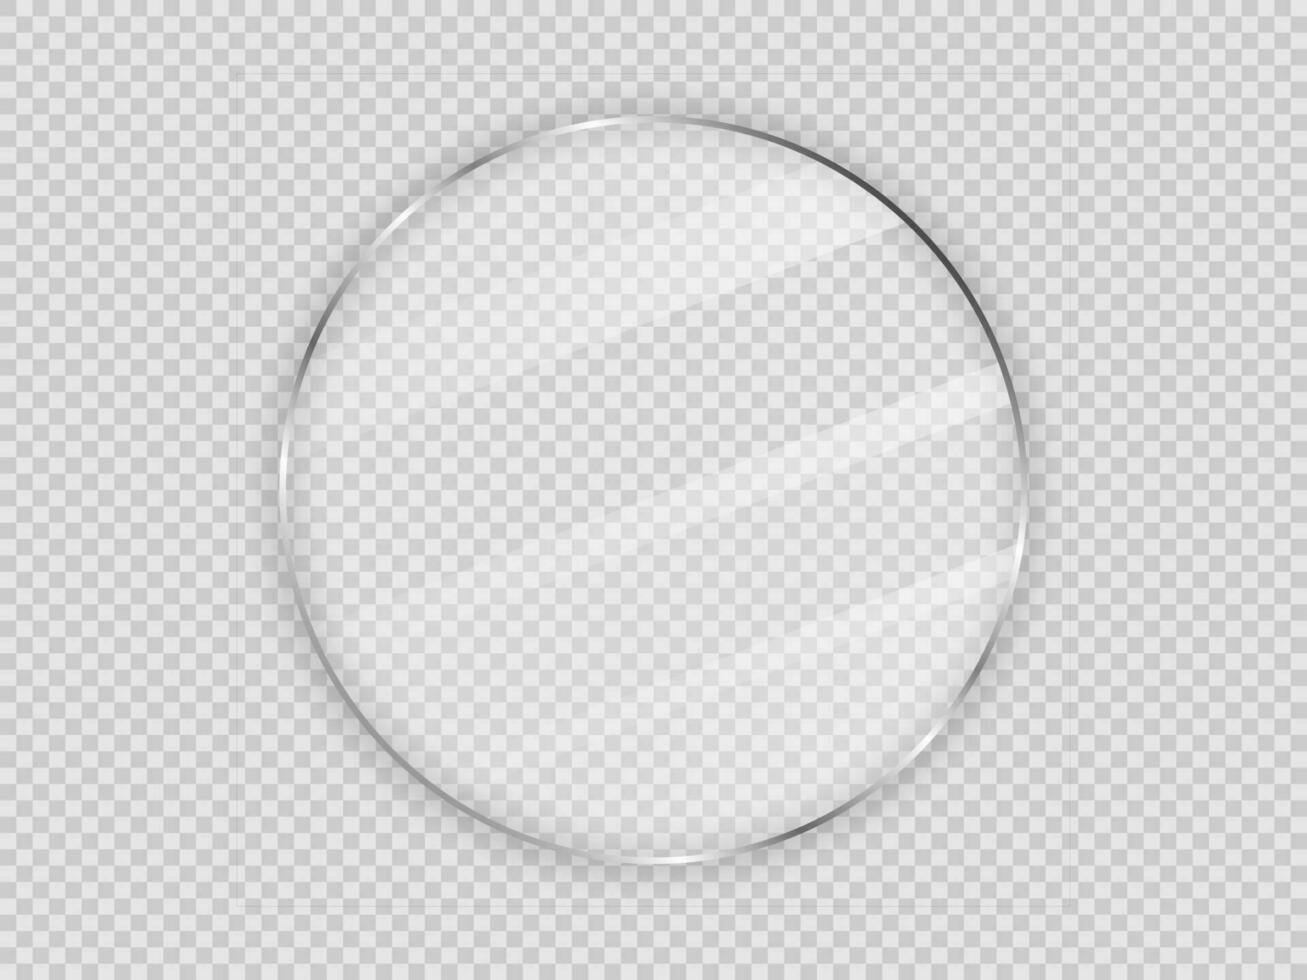 Glass plate in circle frame vector